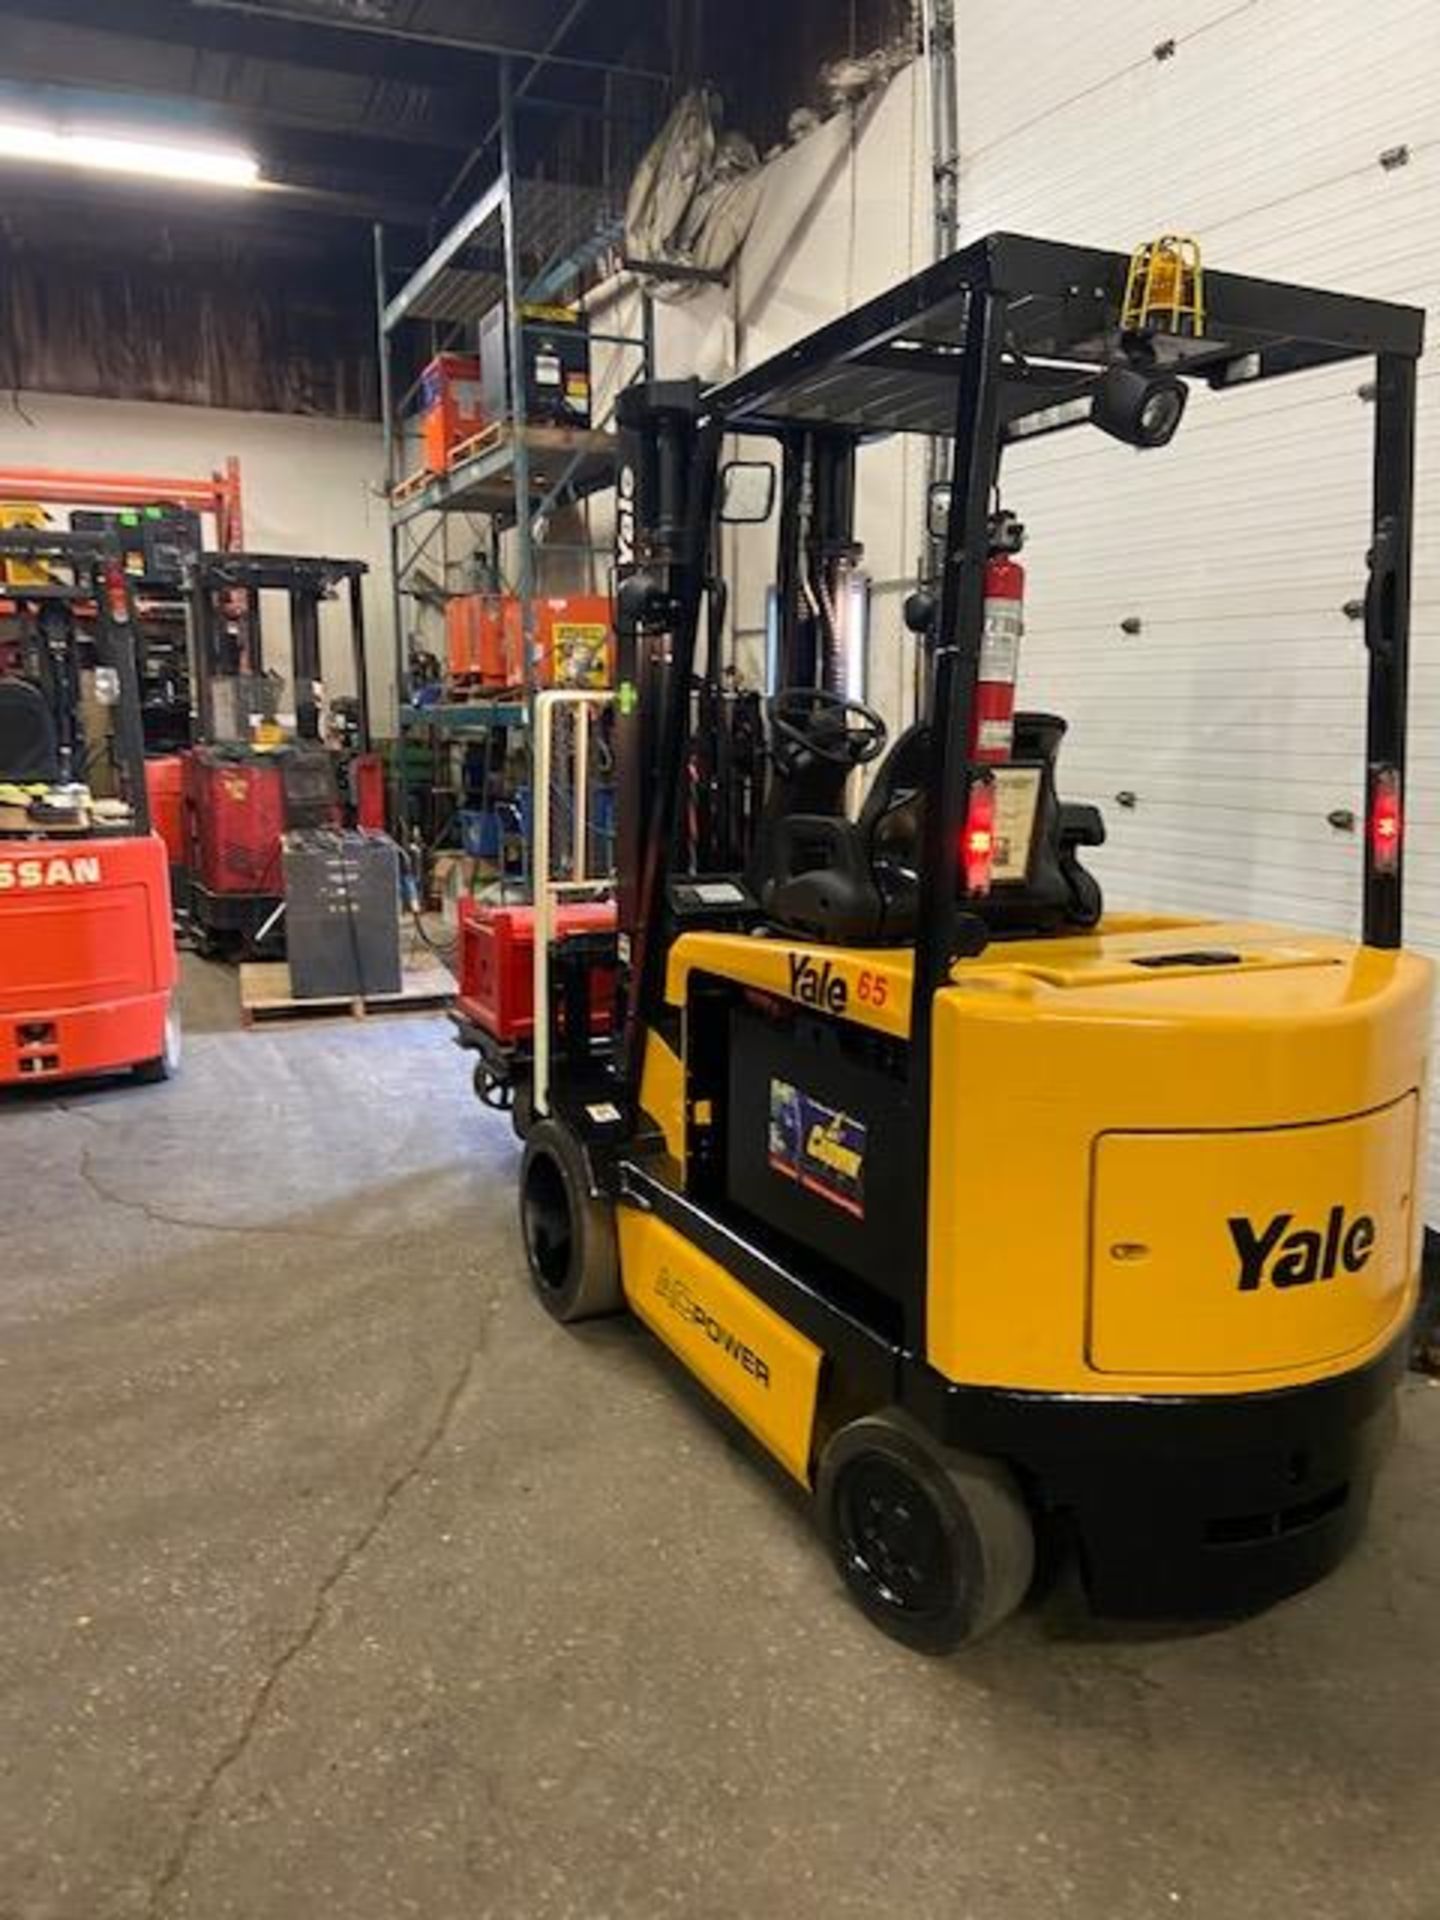 FREE CUSTOMS - 2008 Yale 6500lbs Capacity Forklift Electric with 3-STAGE MAST sideshift (battery - Image 3 of 3